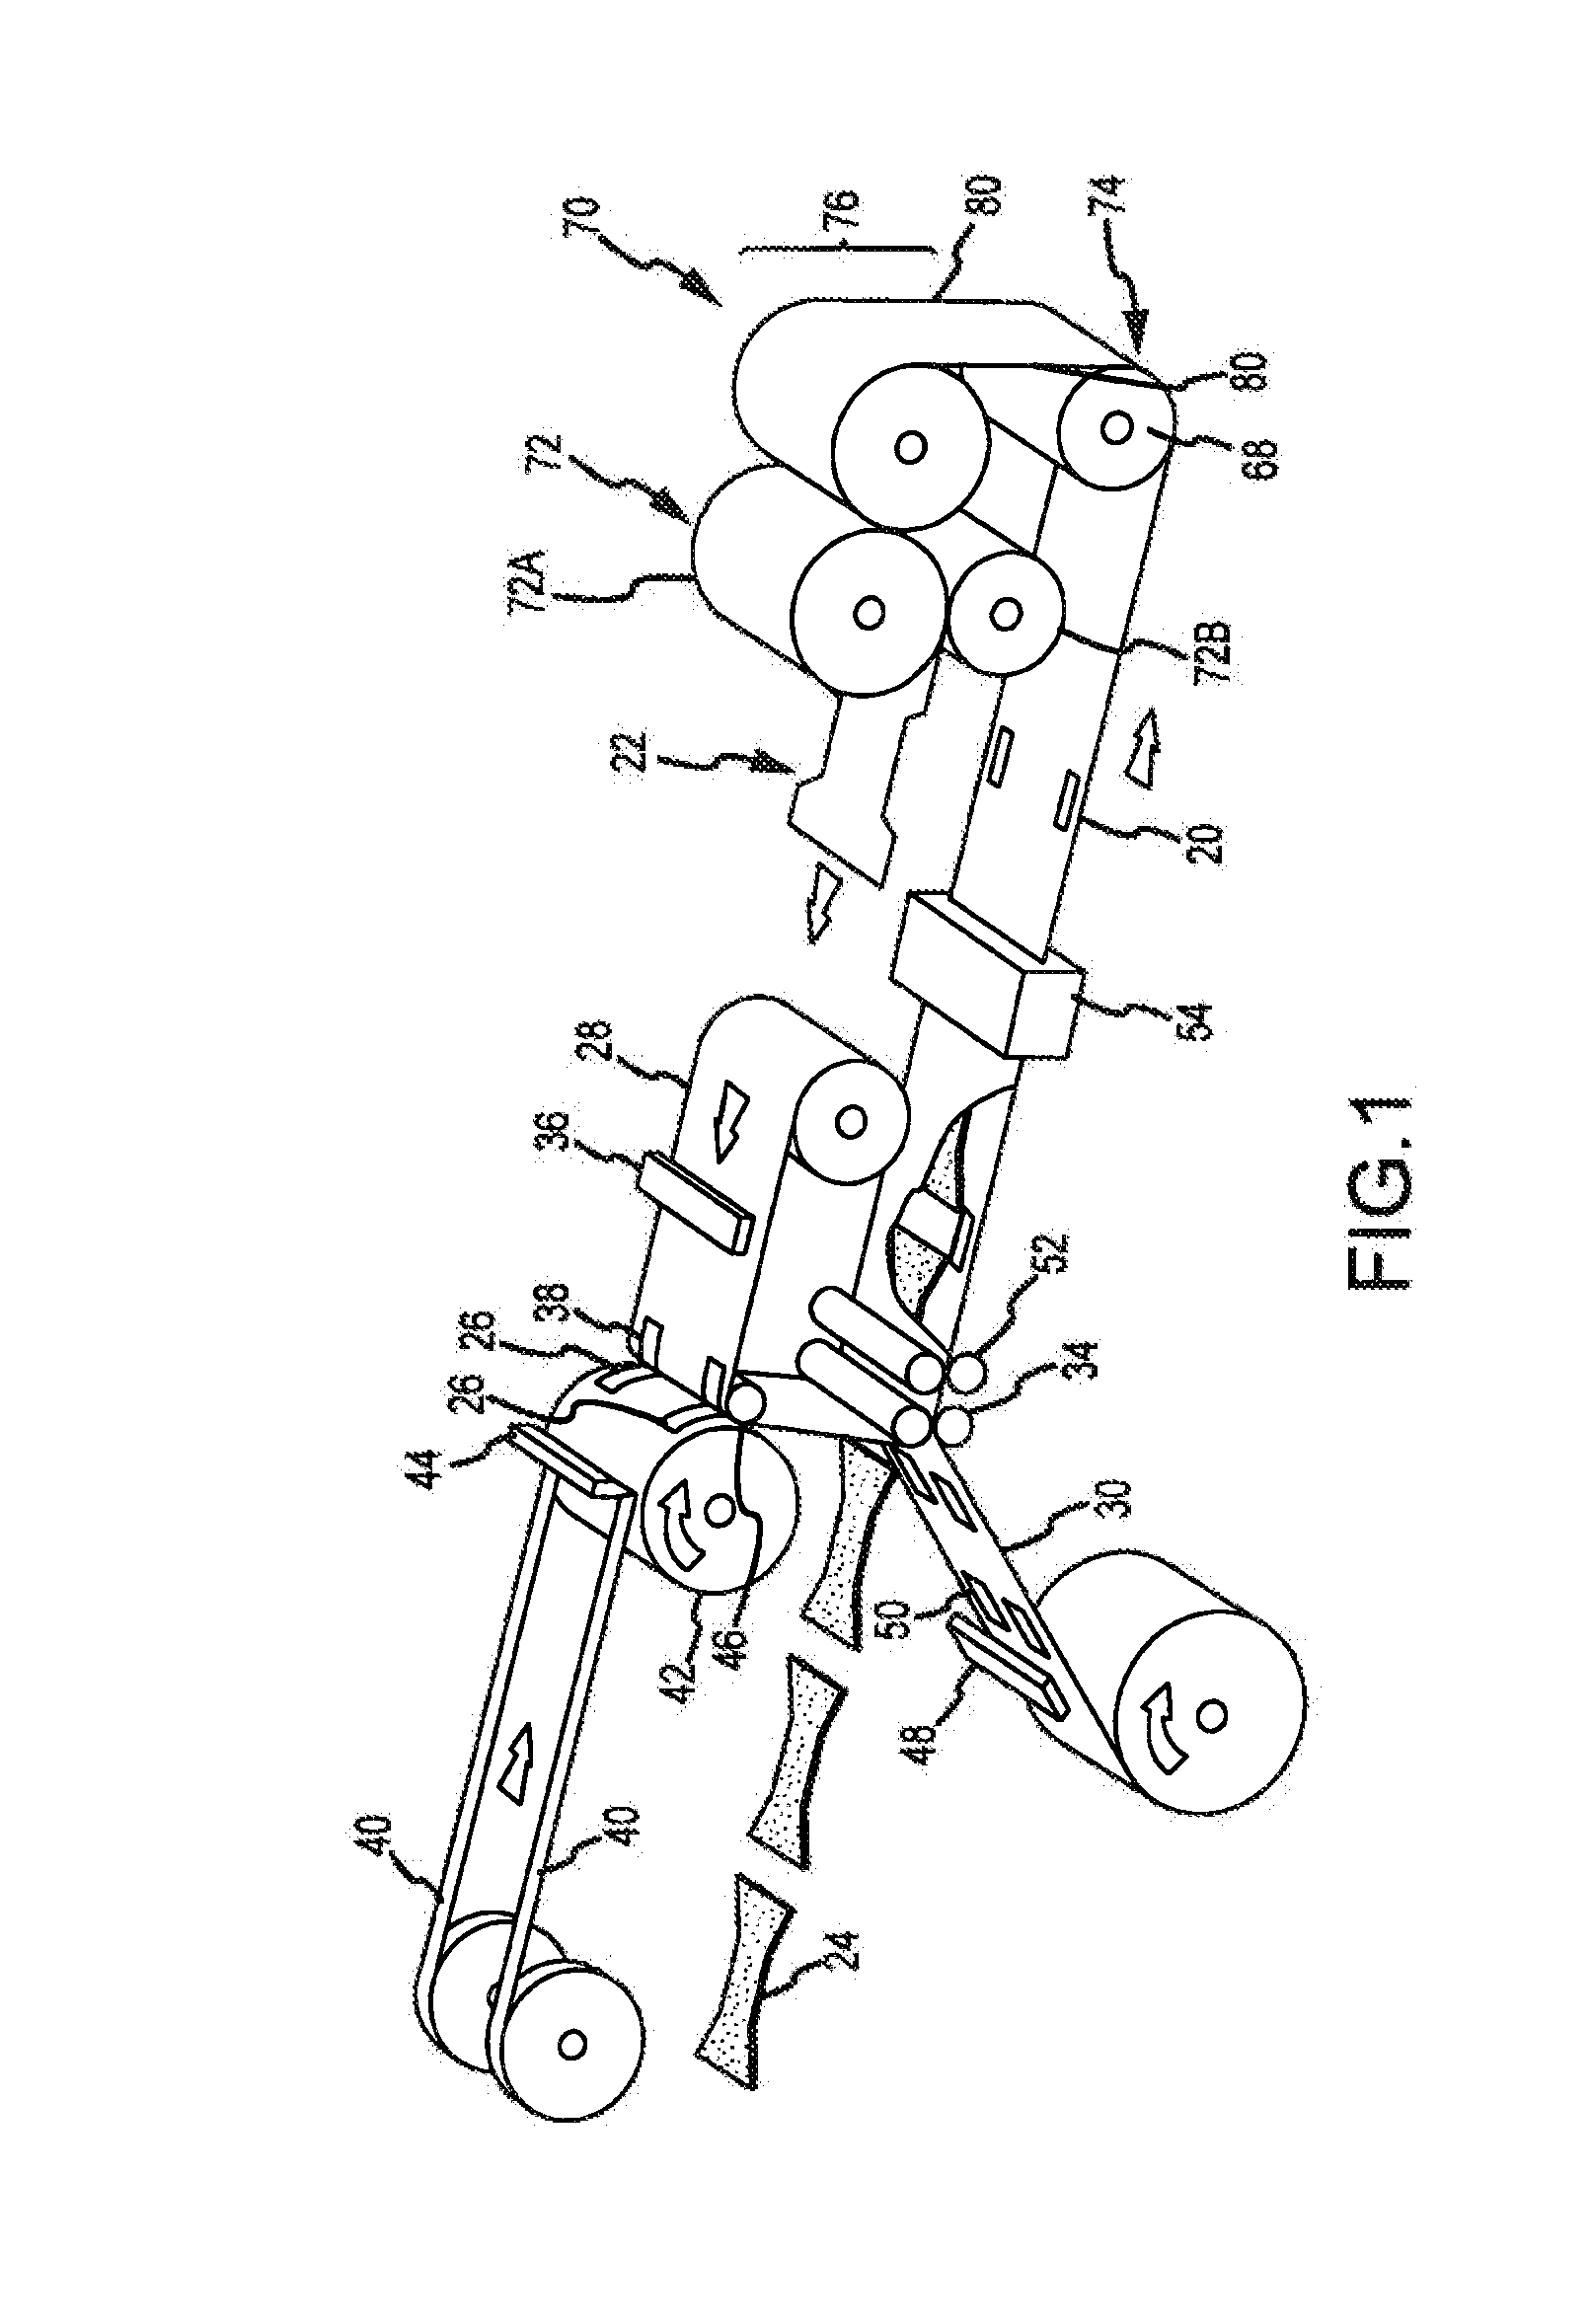 Apparatus And Method For Centering And Spreading A Web